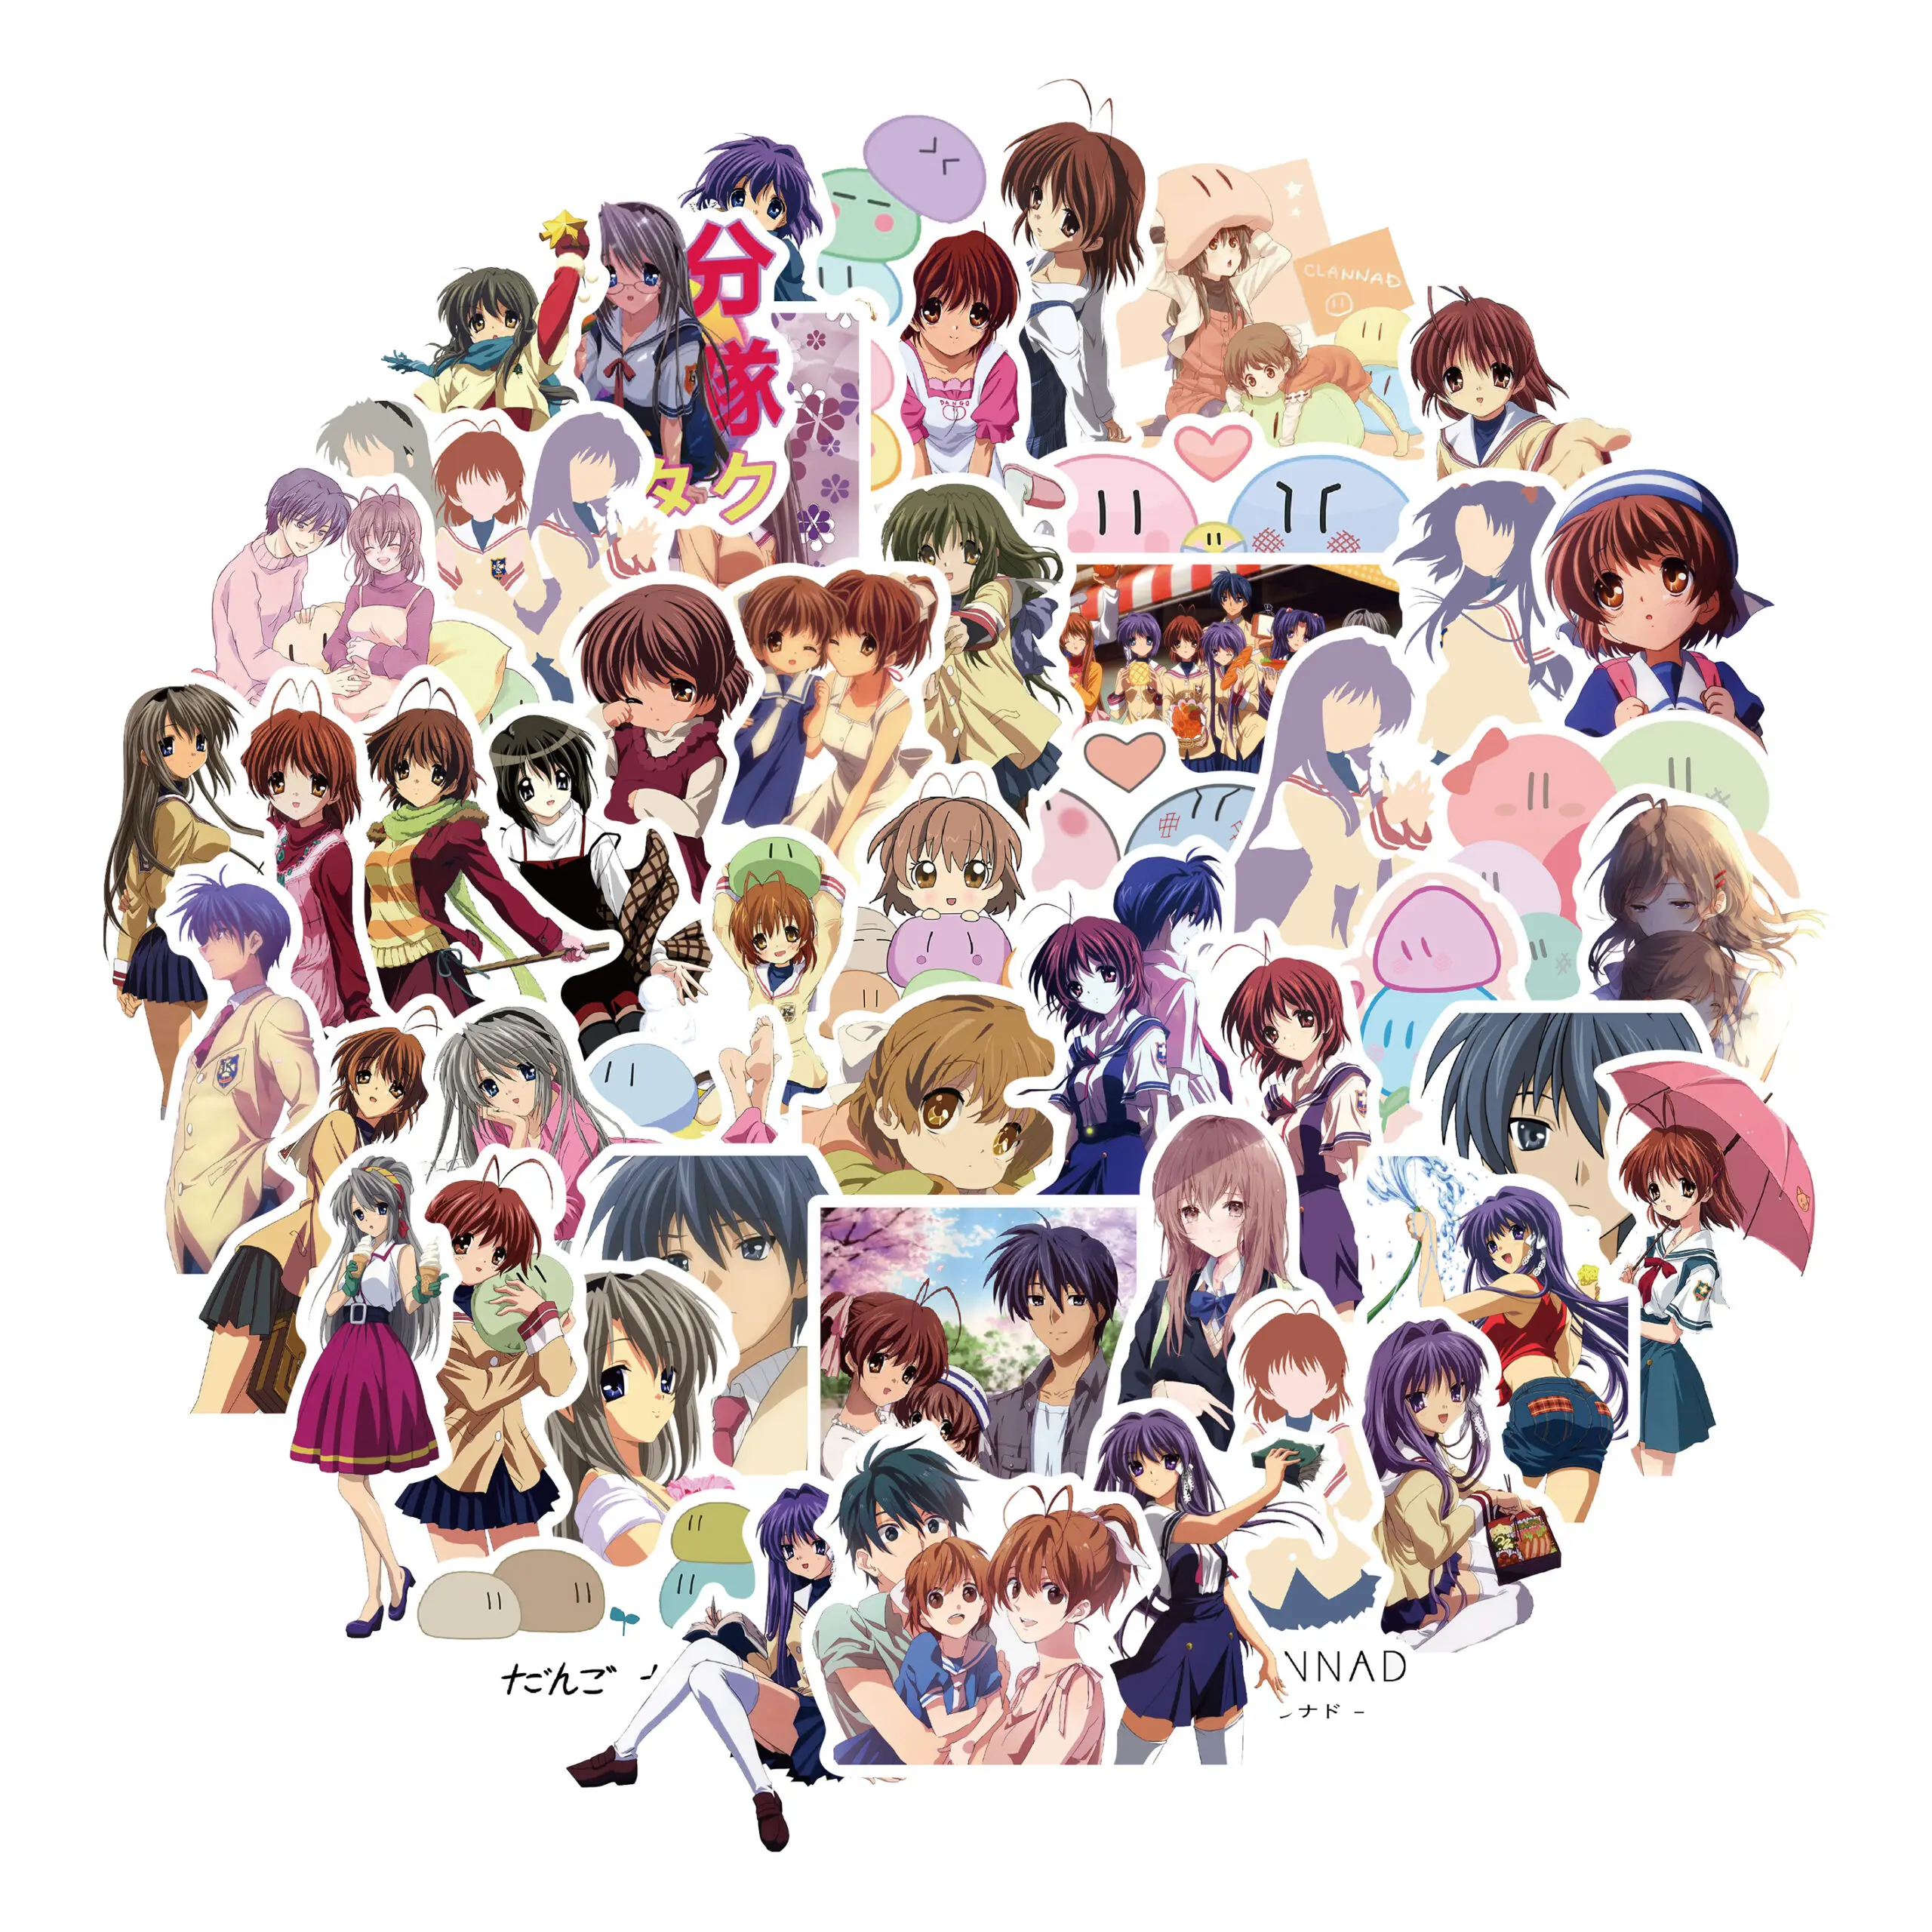 Clannad – All Characters Themed Waterproof Stickers (10/50 Pieces) Posters